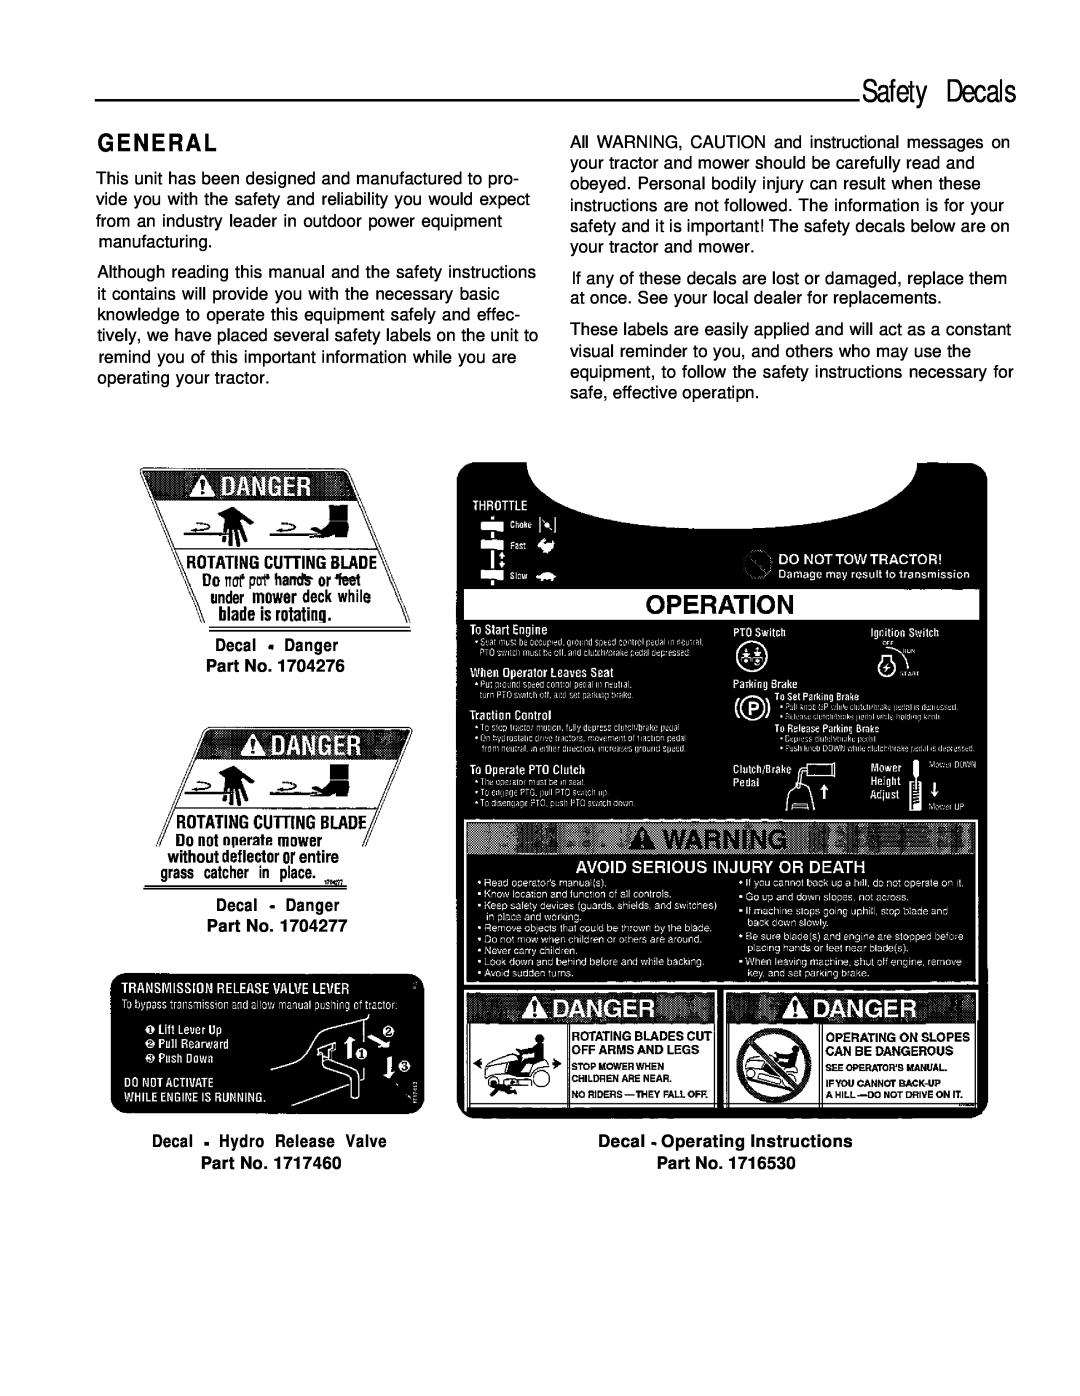 Simplicity 1693264, 1693266 manual Safety Decals, G E N E R A L, Decal - Danger, Decal - Operating Instructions 